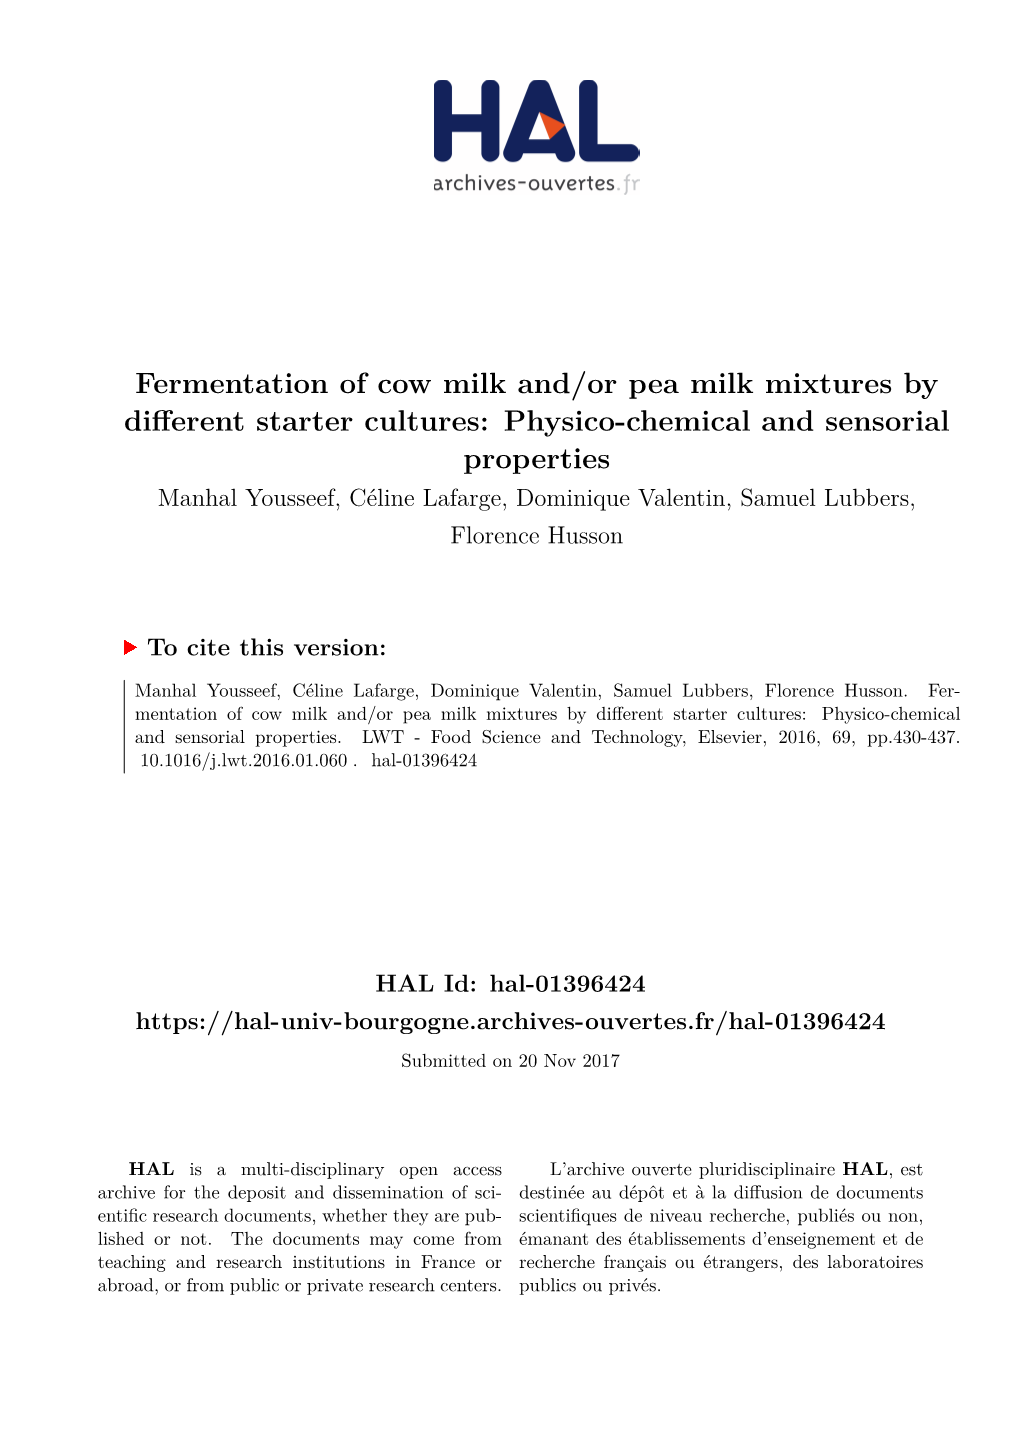 Fermentation of Cow Milk And/Or Pea Milk Mixtures by Different Starter